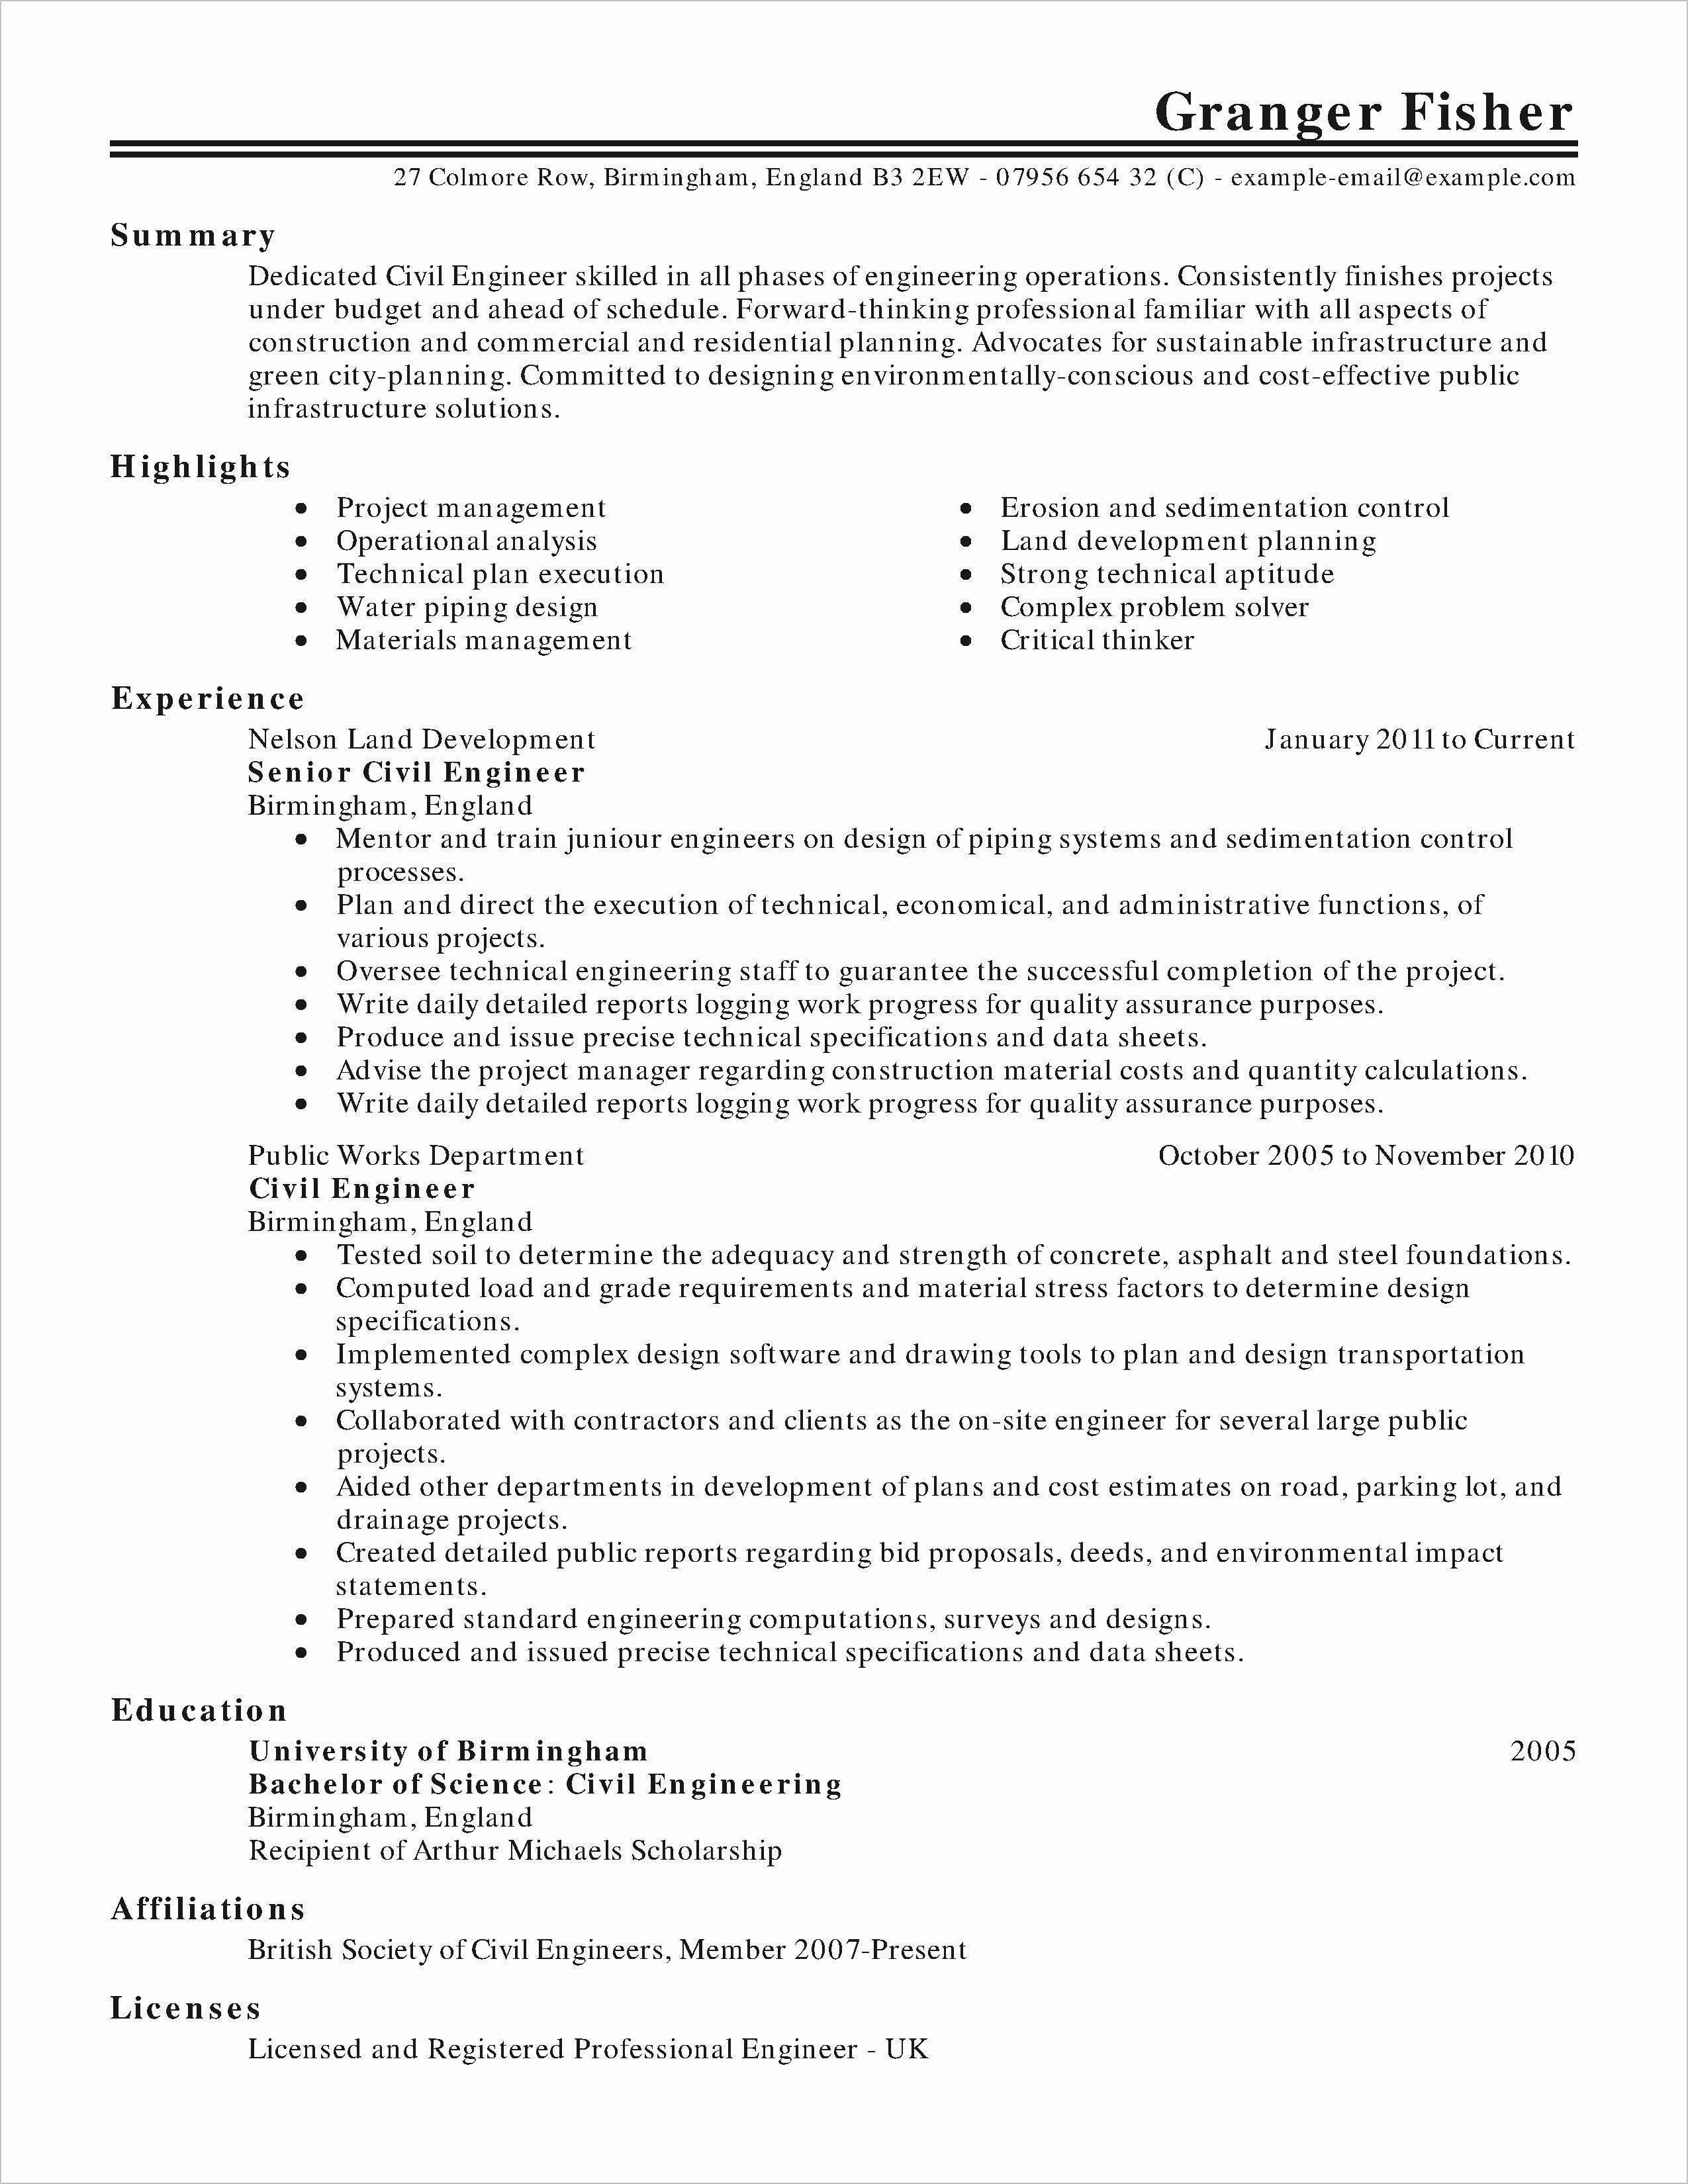 Basic Resume Template Professional Manager Resume New Gym Manager Resume Resume Basic